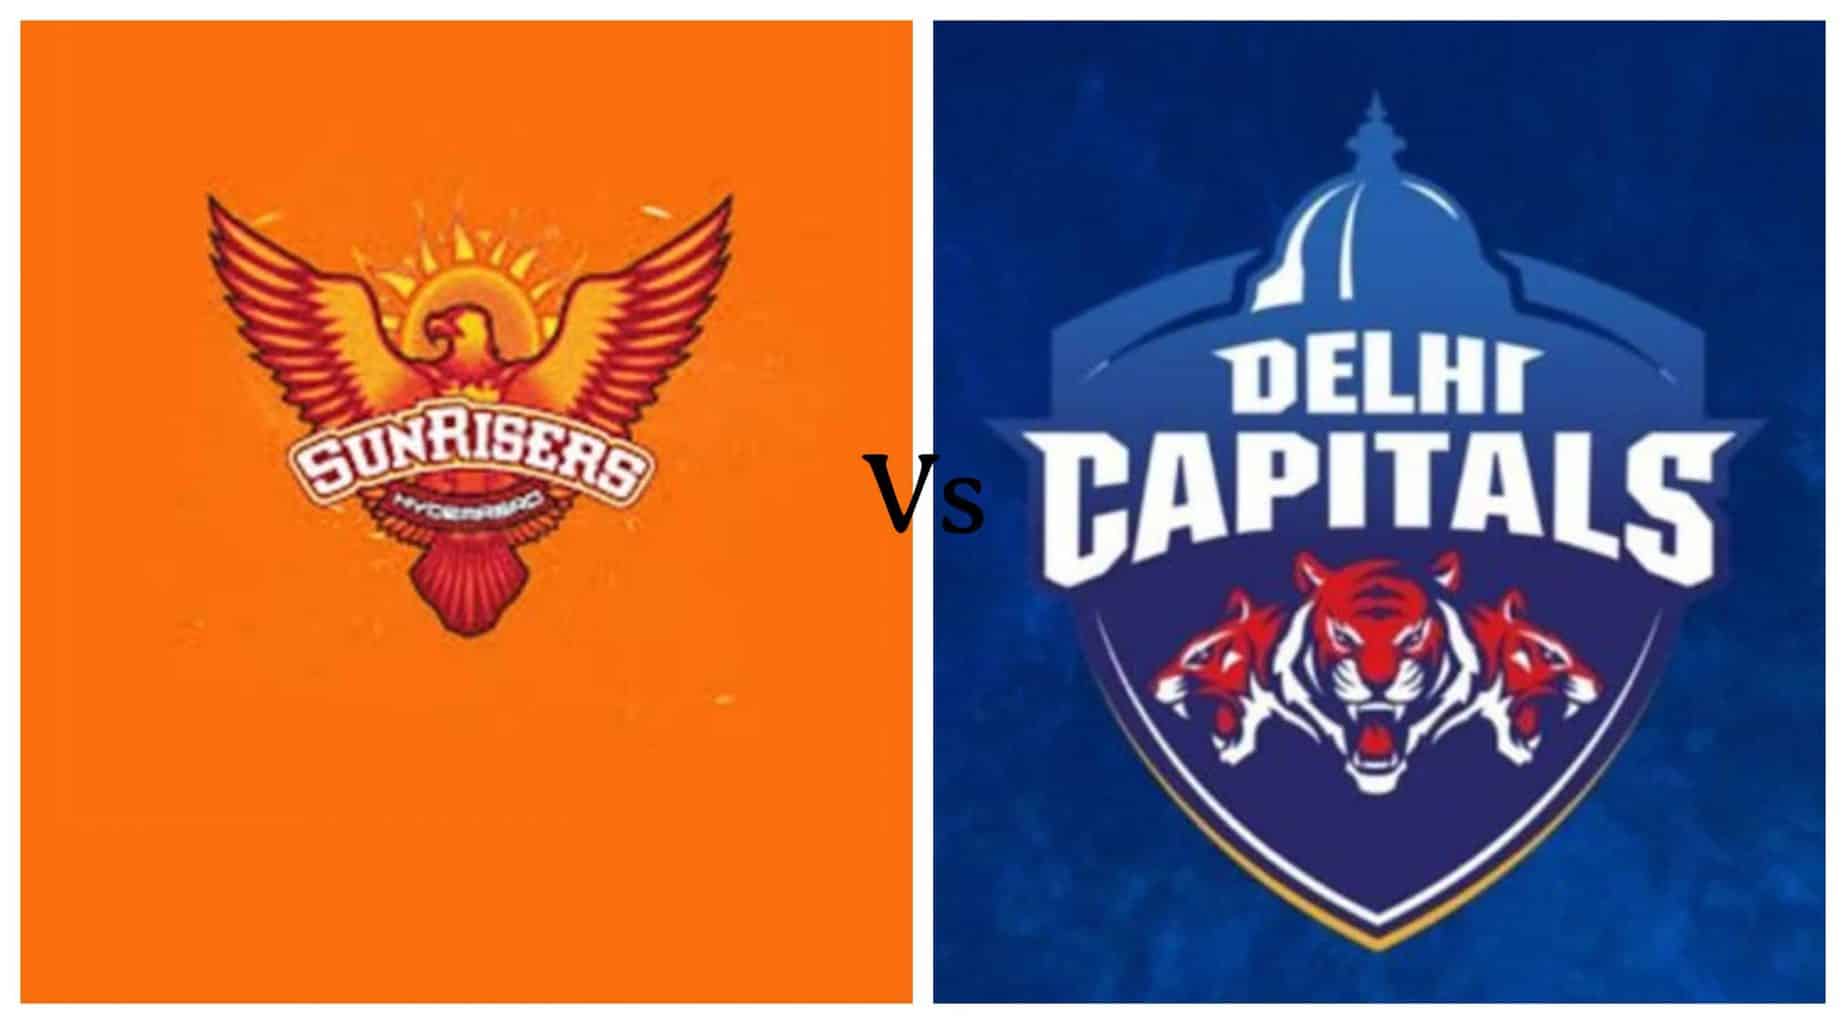 IPL 2020 Qualifier 2 DC vs SRH Live Match: How To Watch, Squads, Time, Date and Venue